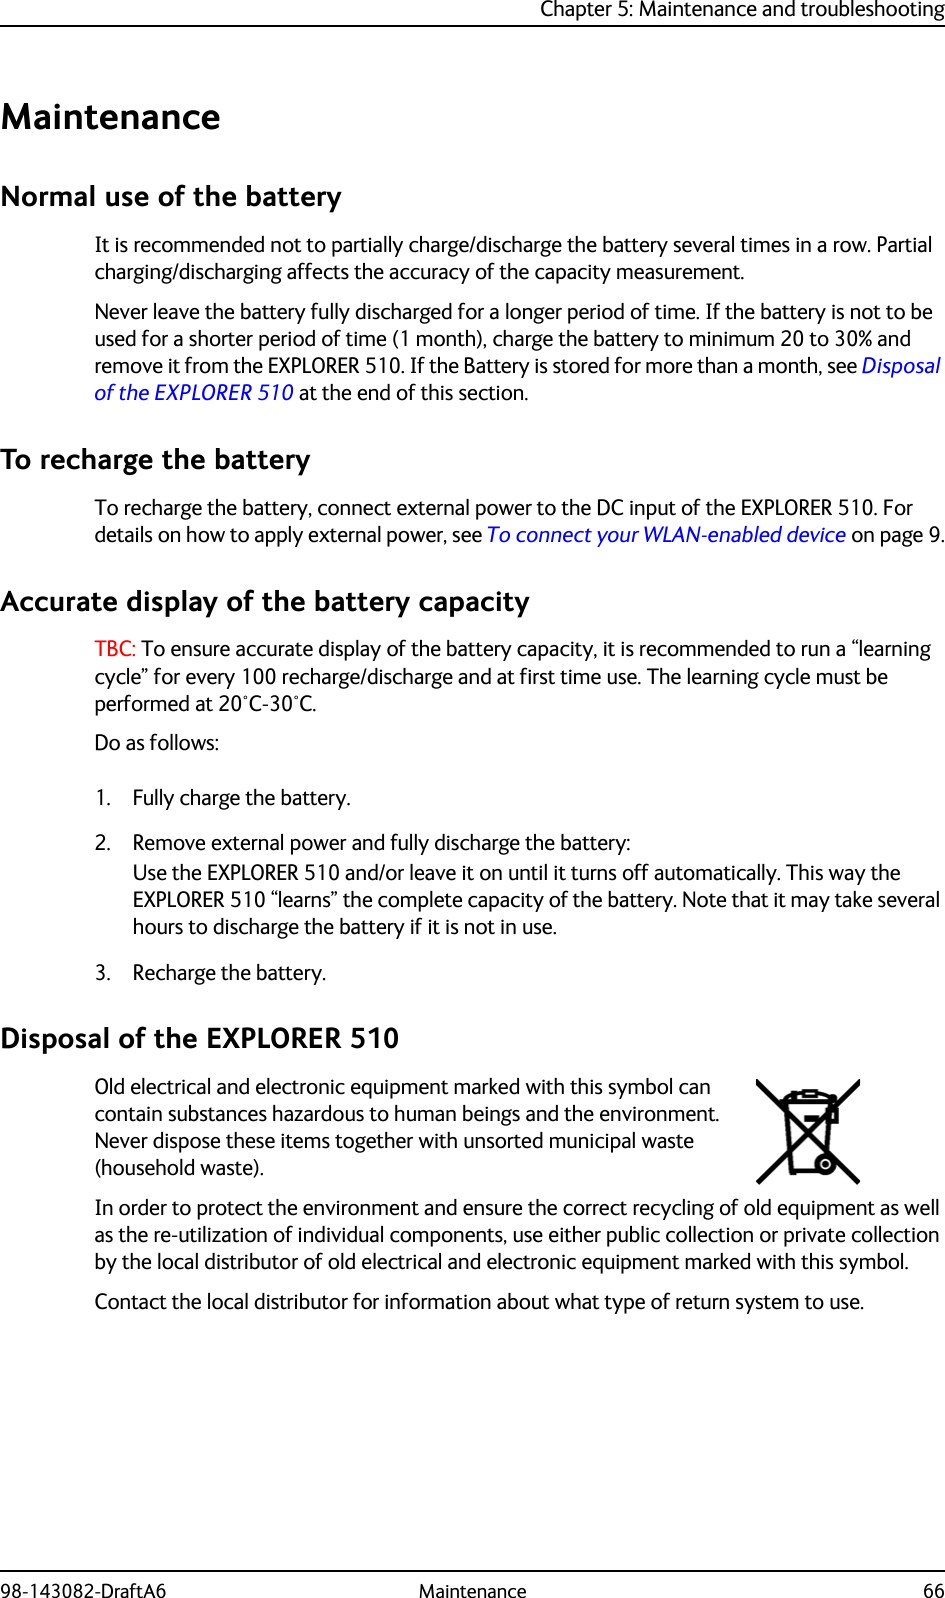 Chapter 5: Maintenance and troubleshooting98-143082-DraftA6 Maintenance 66MaintenanceNormal use of the batteryIt is recommended not to partially charge/discharge the battery several times in a row. Partial charging/discharging affects the accuracy of the capacity measurement.Never leave the battery fully discharged for a longer period of time. If the battery is not to be used for a shorter period of time (1 month), charge the battery to minimum 20 to 30% and remove it from the EXPLORER 510. If the Battery is stored for more than a month, see Disposal of the EXPLORER 510 at the end of this section.To recharge the batteryTo recharge the battery, connect external power to the DC input of the EXPLORER 510. For details on how to apply external power, see To connect your WLAN-enabled device on page 9.Accurate display of the battery capacityTBC: To ensure accurate display of the battery capacity, it is recommended to run a “learning cycle” for every 100 recharge/discharge and at first time use. The learning cycle must be performed at 20°C-30°C.Do as follows:1. Fully charge the battery.2. Remove external power and fully discharge the battery:Use the EXPLORER 510 and/or leave it on until it turns off automatically. This way the EXPLORER 510 “learns” the complete capacity of the battery. Note that it may take several hours to discharge the battery if it is not in use.3. Recharge the battery.Disposal of the EXPLORER 510Old electrical and electronic equipment marked with this symbol can contain substances hazardous to human beings and the environment. Never dispose these items together with unsorted municipal waste (household waste). In order to protect the environment and ensure the correct recycling of old equipment as well as the re-utilization of individual components, use either public collection or private collection by the local distributor of old electrical and electronic equipment marked with this symbol. Contact the local distributor for information about what type of return system to use. 